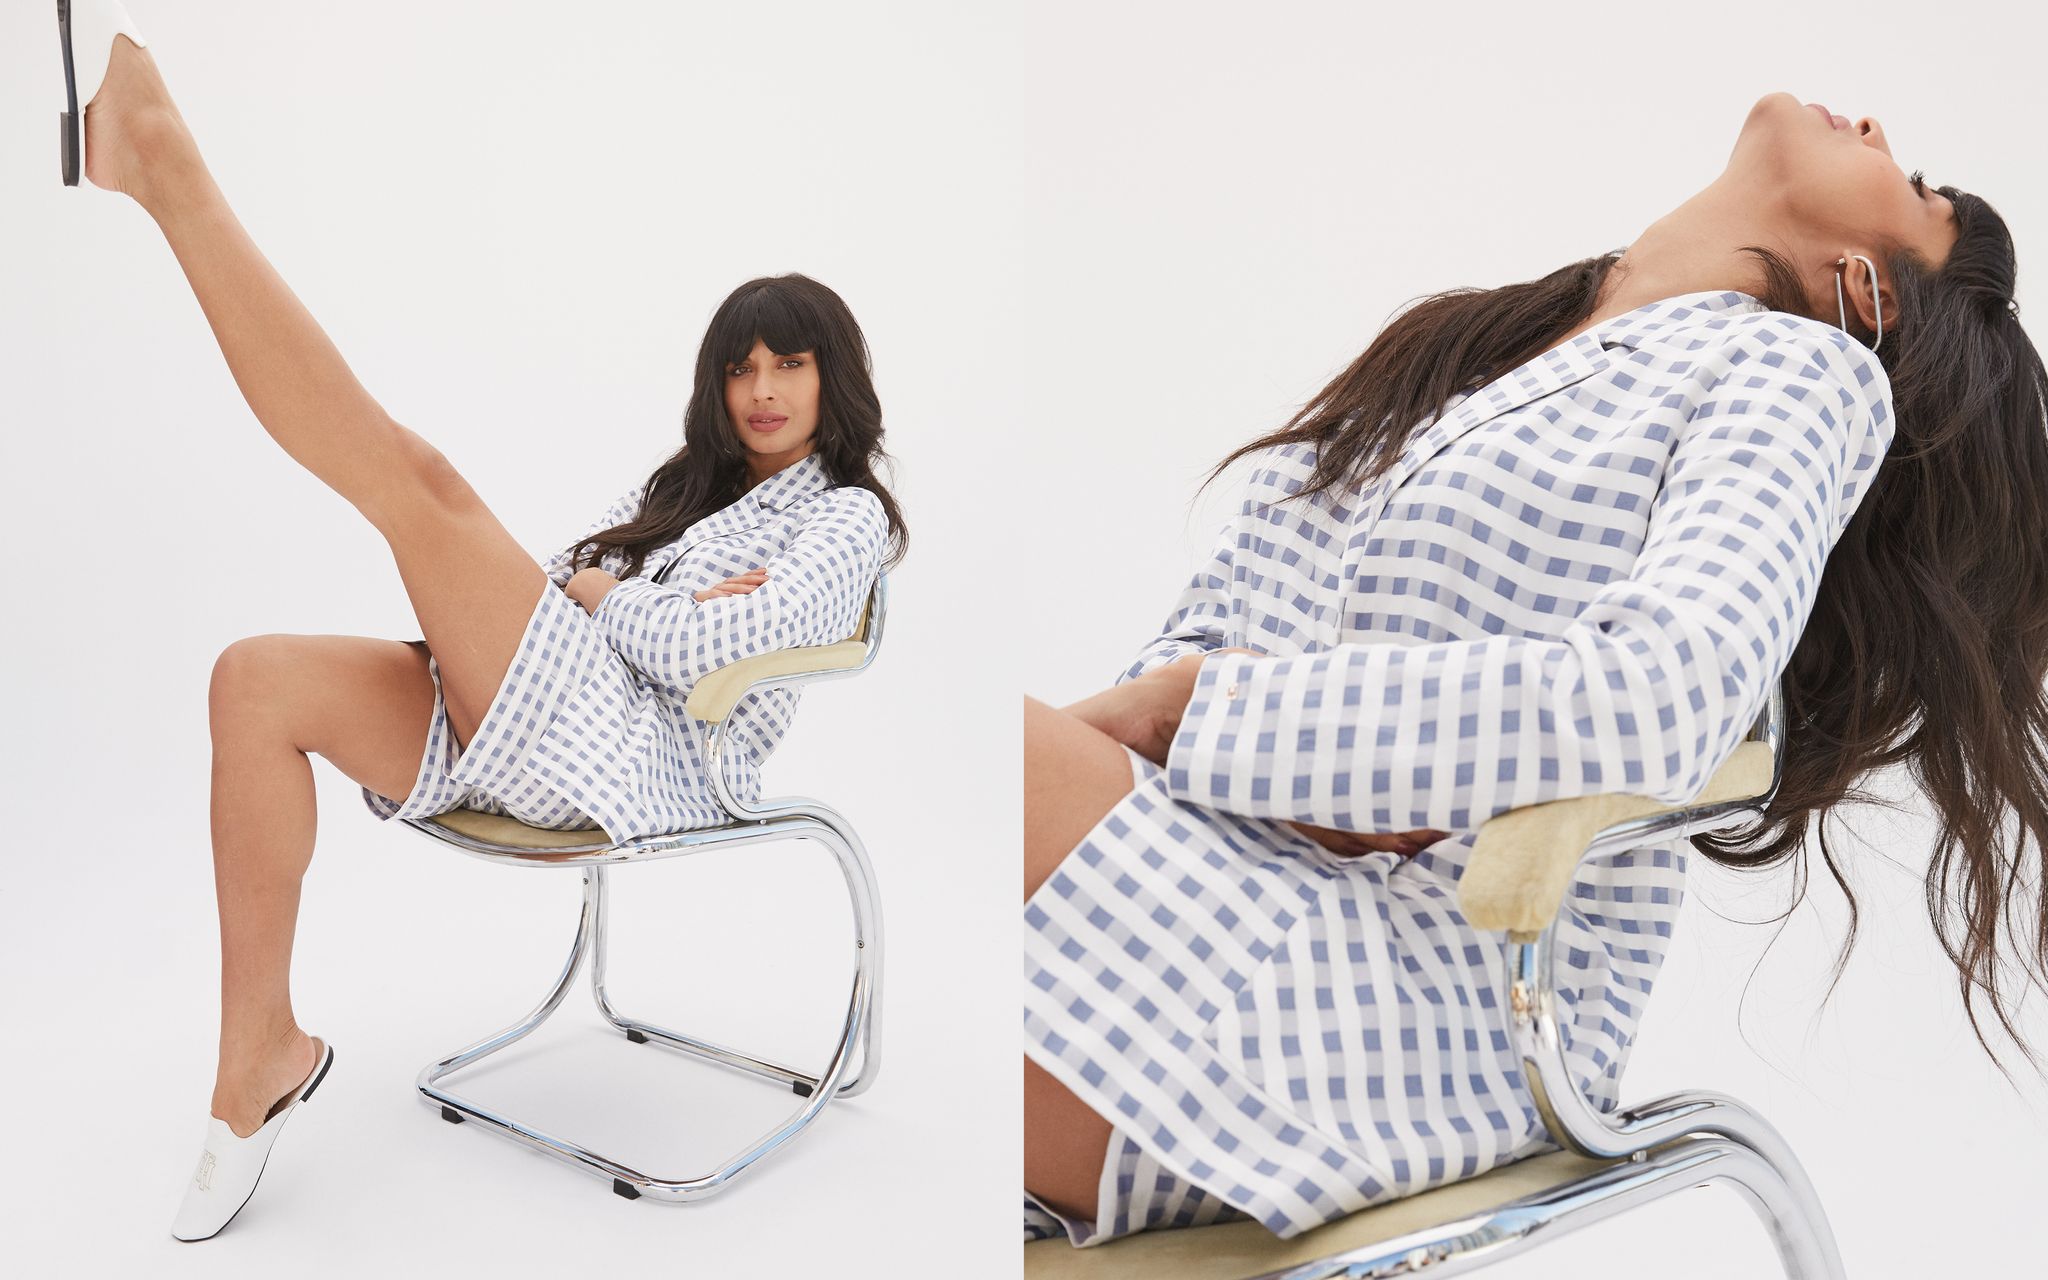 jameela jamil sitting with her leg in the air on a retro chair against a white backdrop, wearing a blue and white checked blazer and shorts and white backless loafers